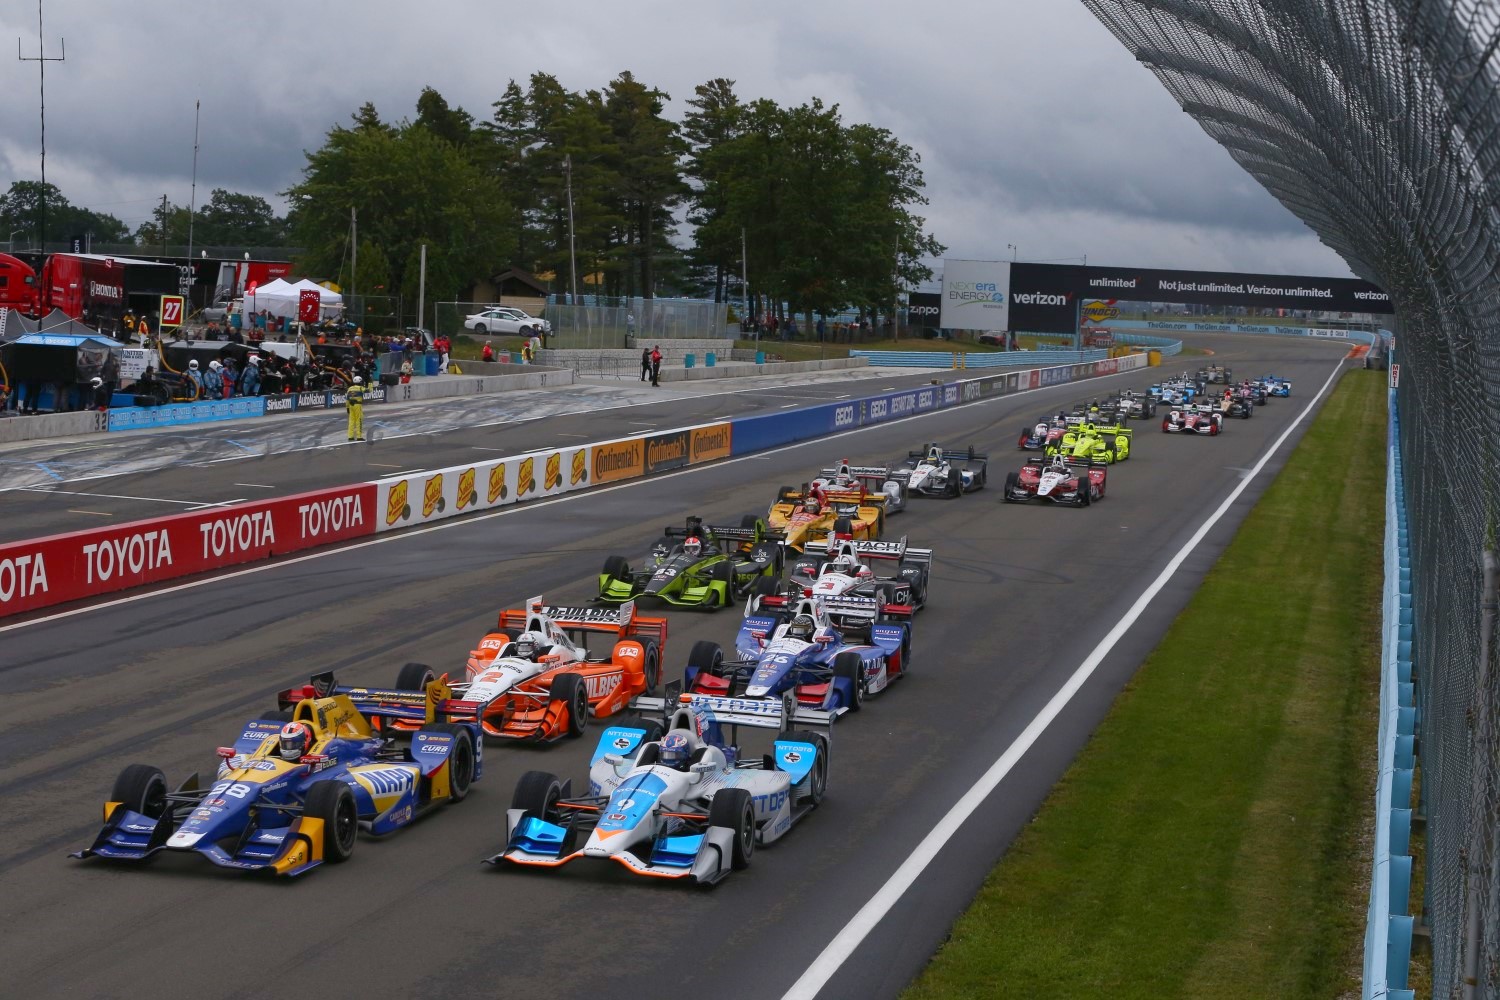 IndyCars are gone from Watkins Glen, possibly for good after failing multiple times.